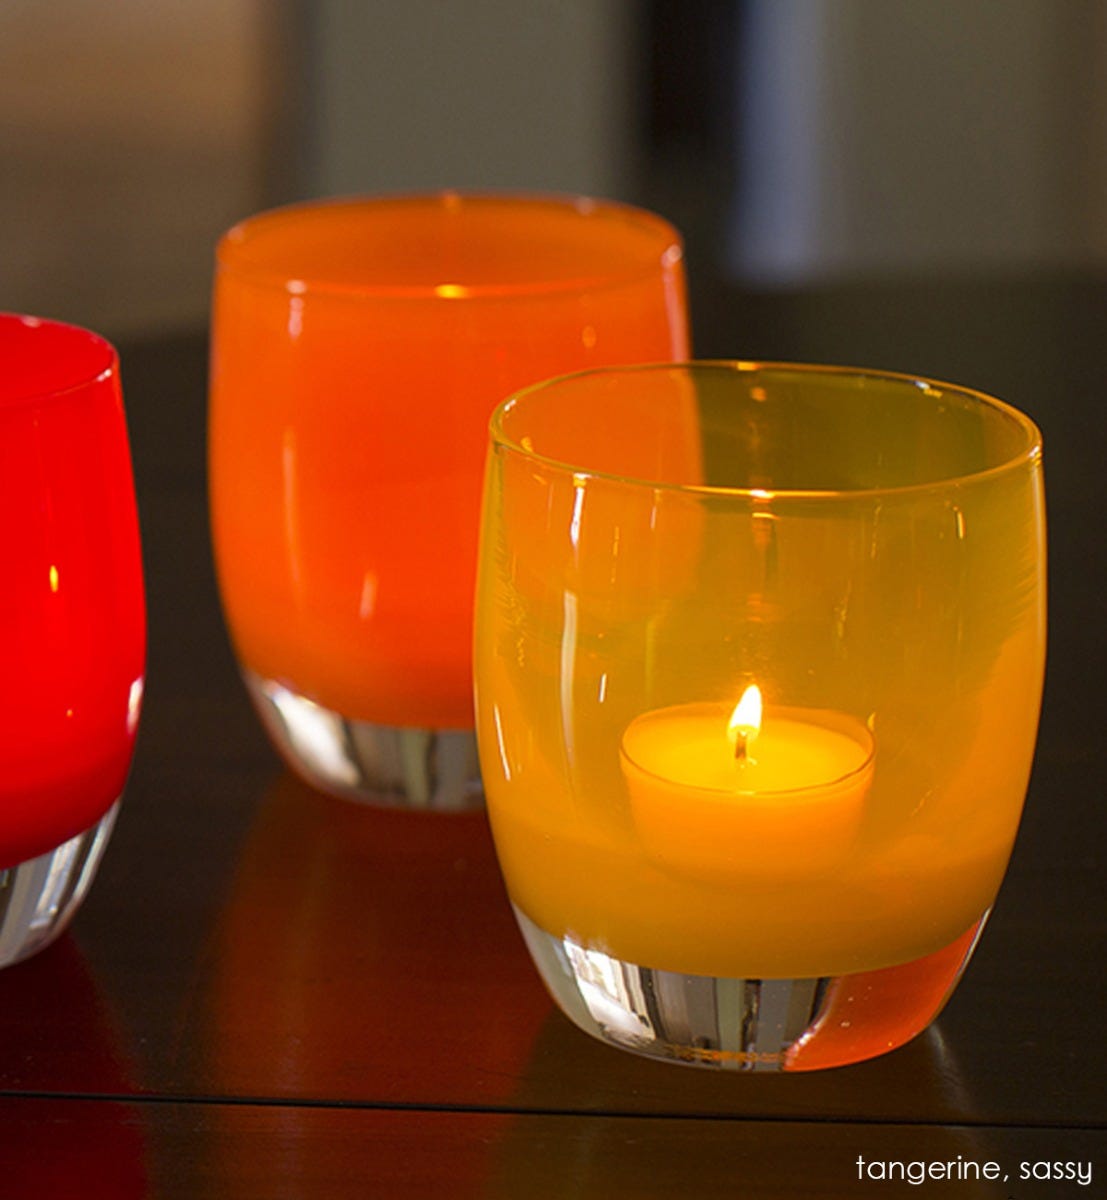 sassy bright orange yellow hand-blown glass votive candle holder. Paired with tangerine.